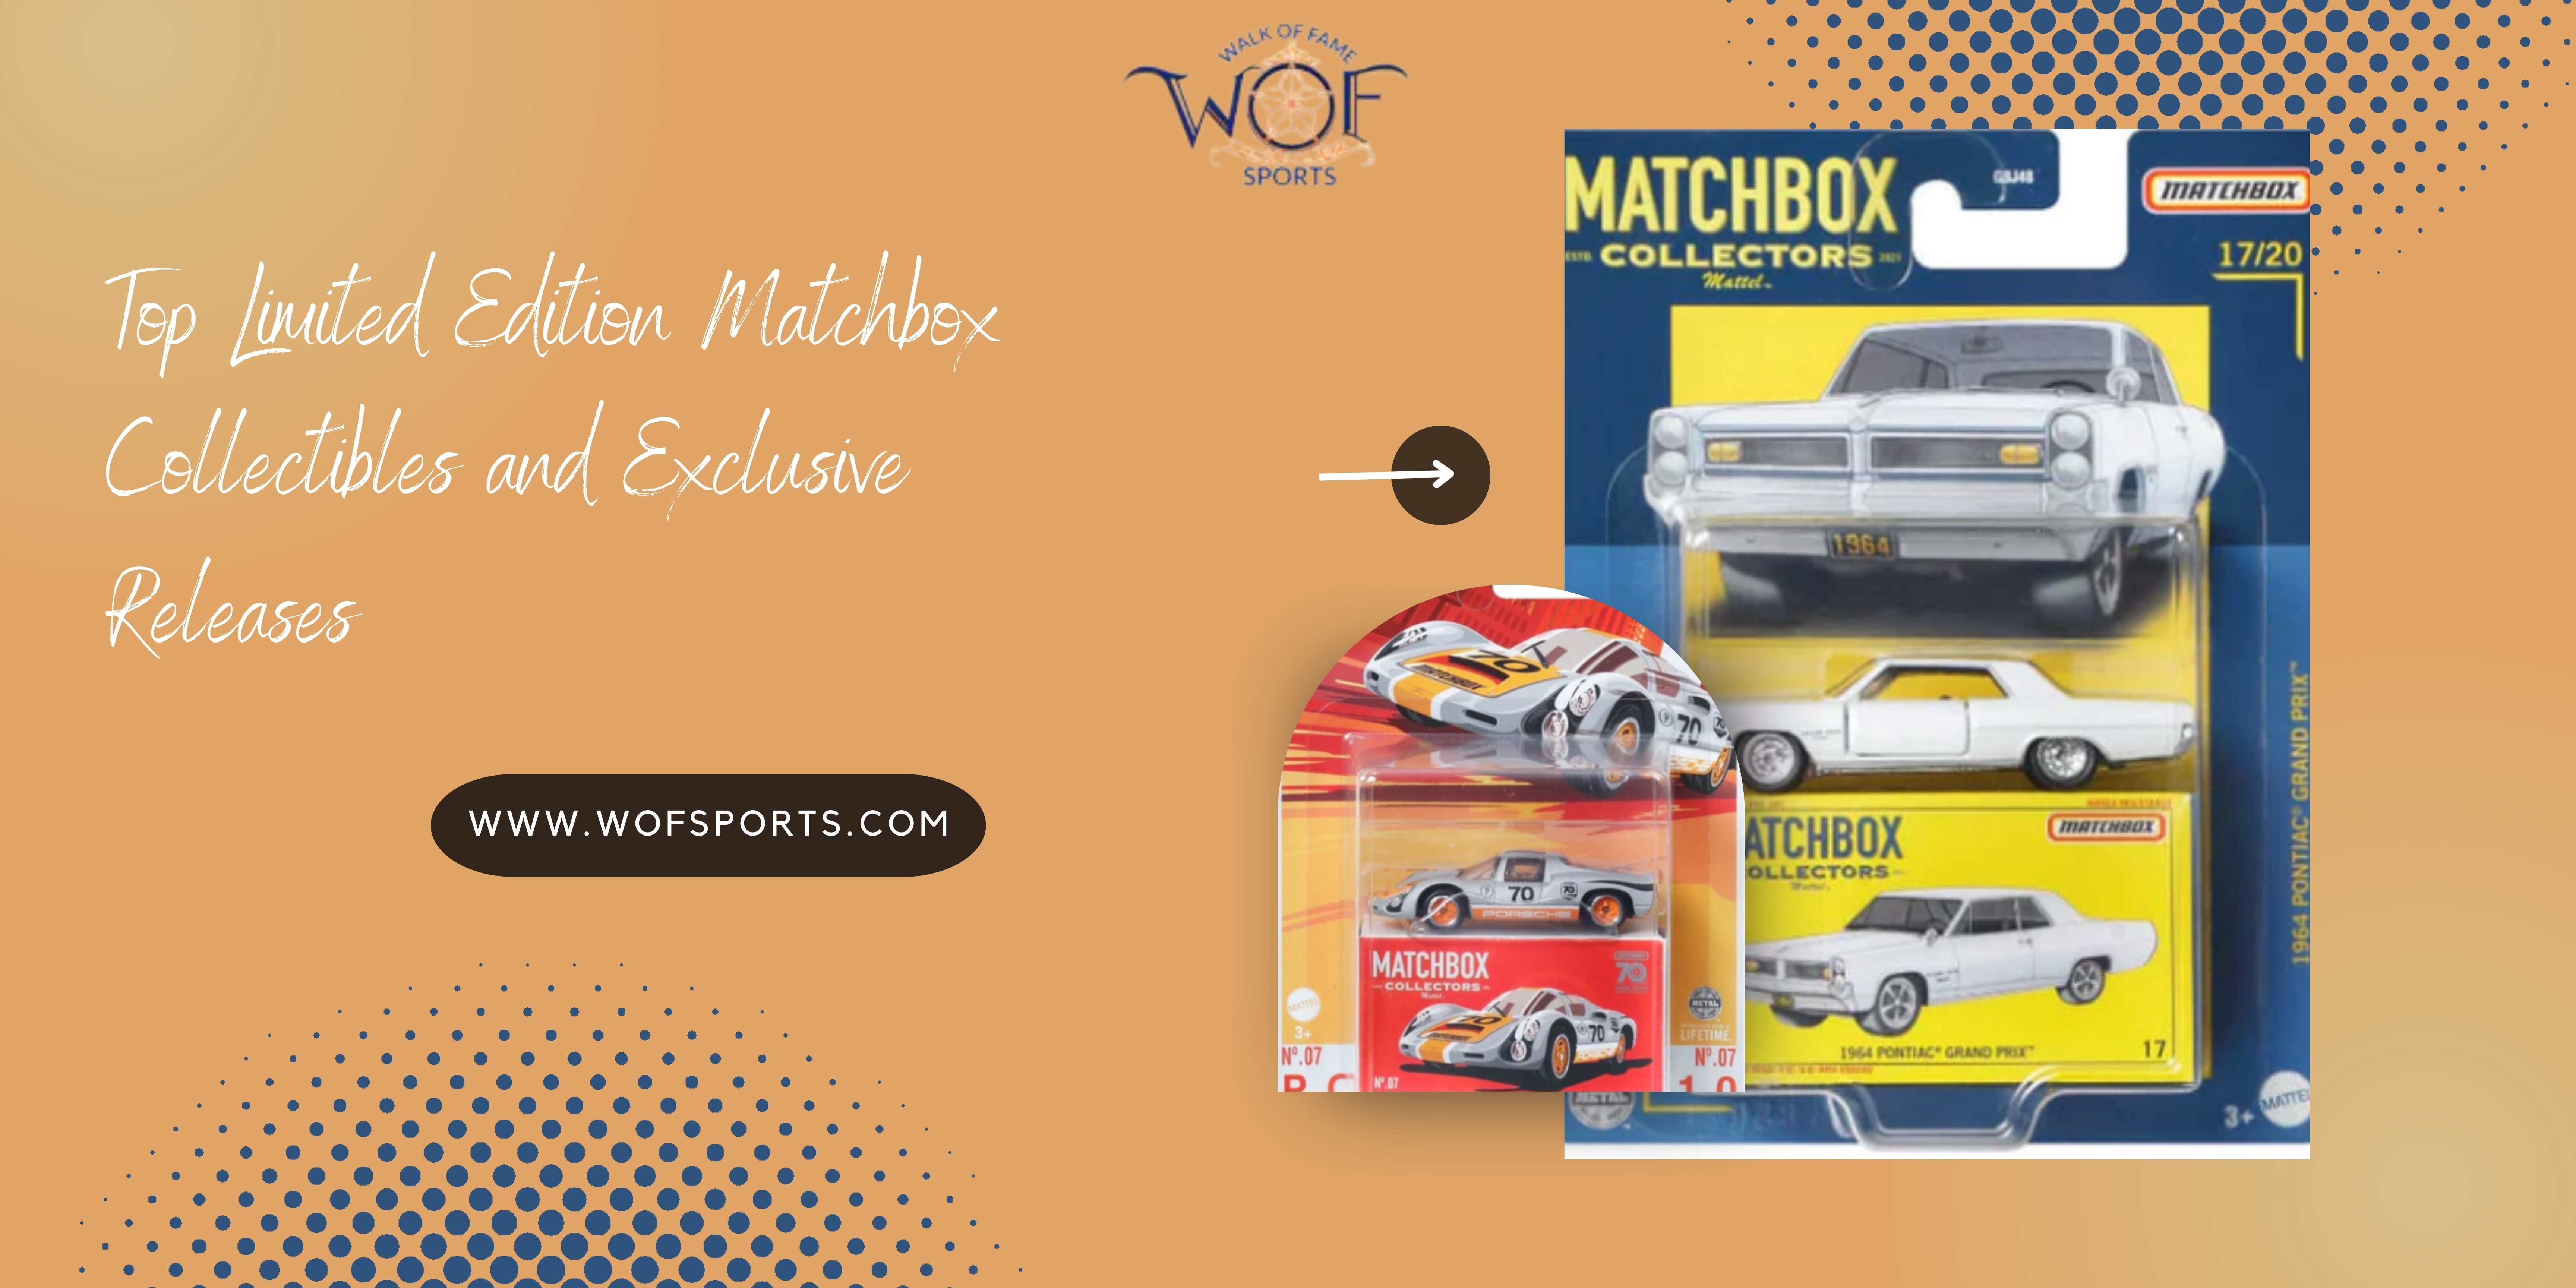 Top Limited Edition Matchbox Collectibles and Exclusive Releases